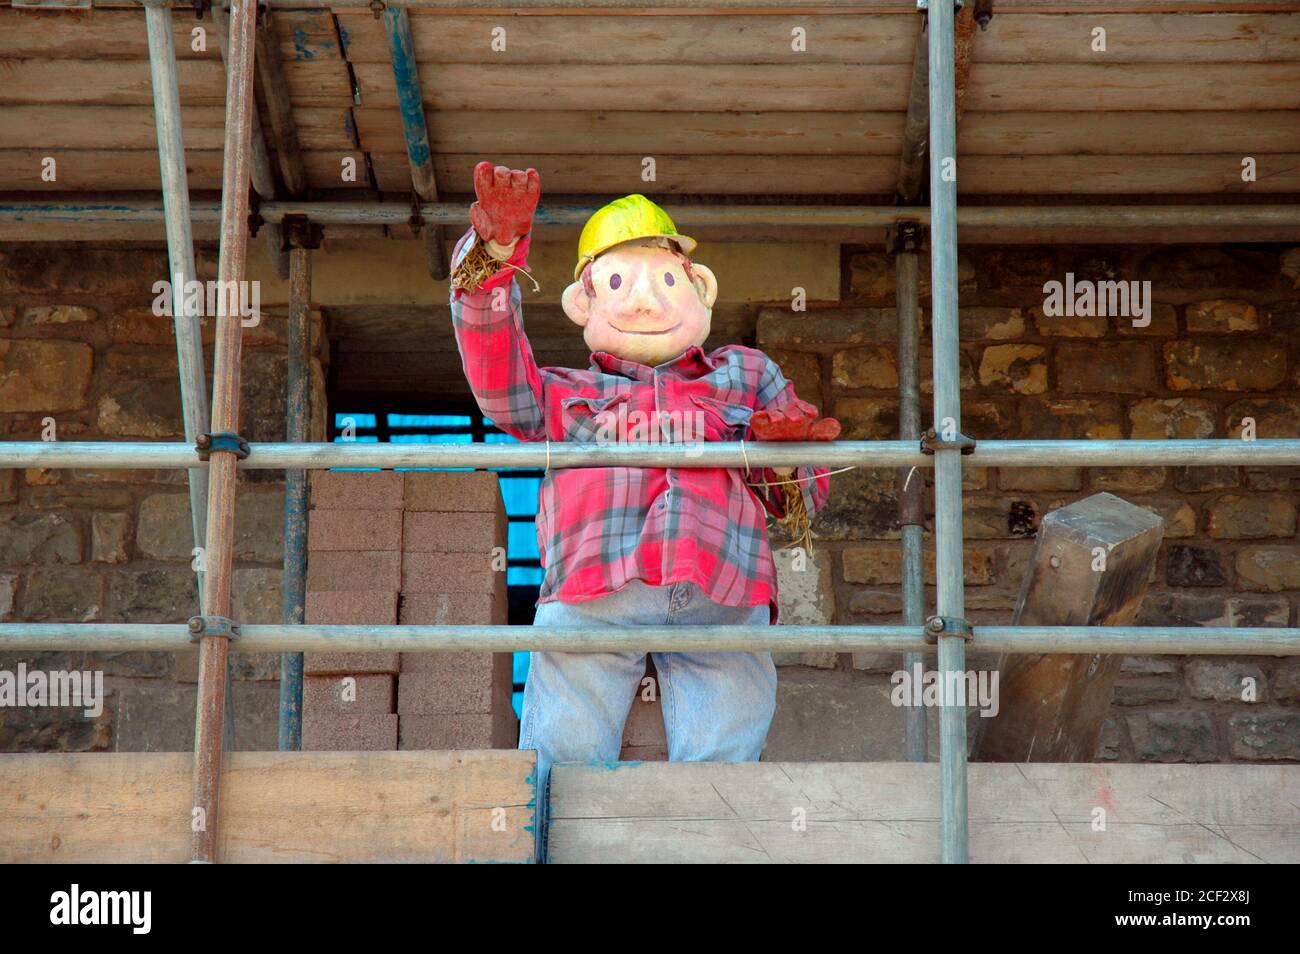 An exhibit at the Scarecrow Festival held annually at the village of Wray, near Lancaster, UK.  Bob the Builder Stock Photo